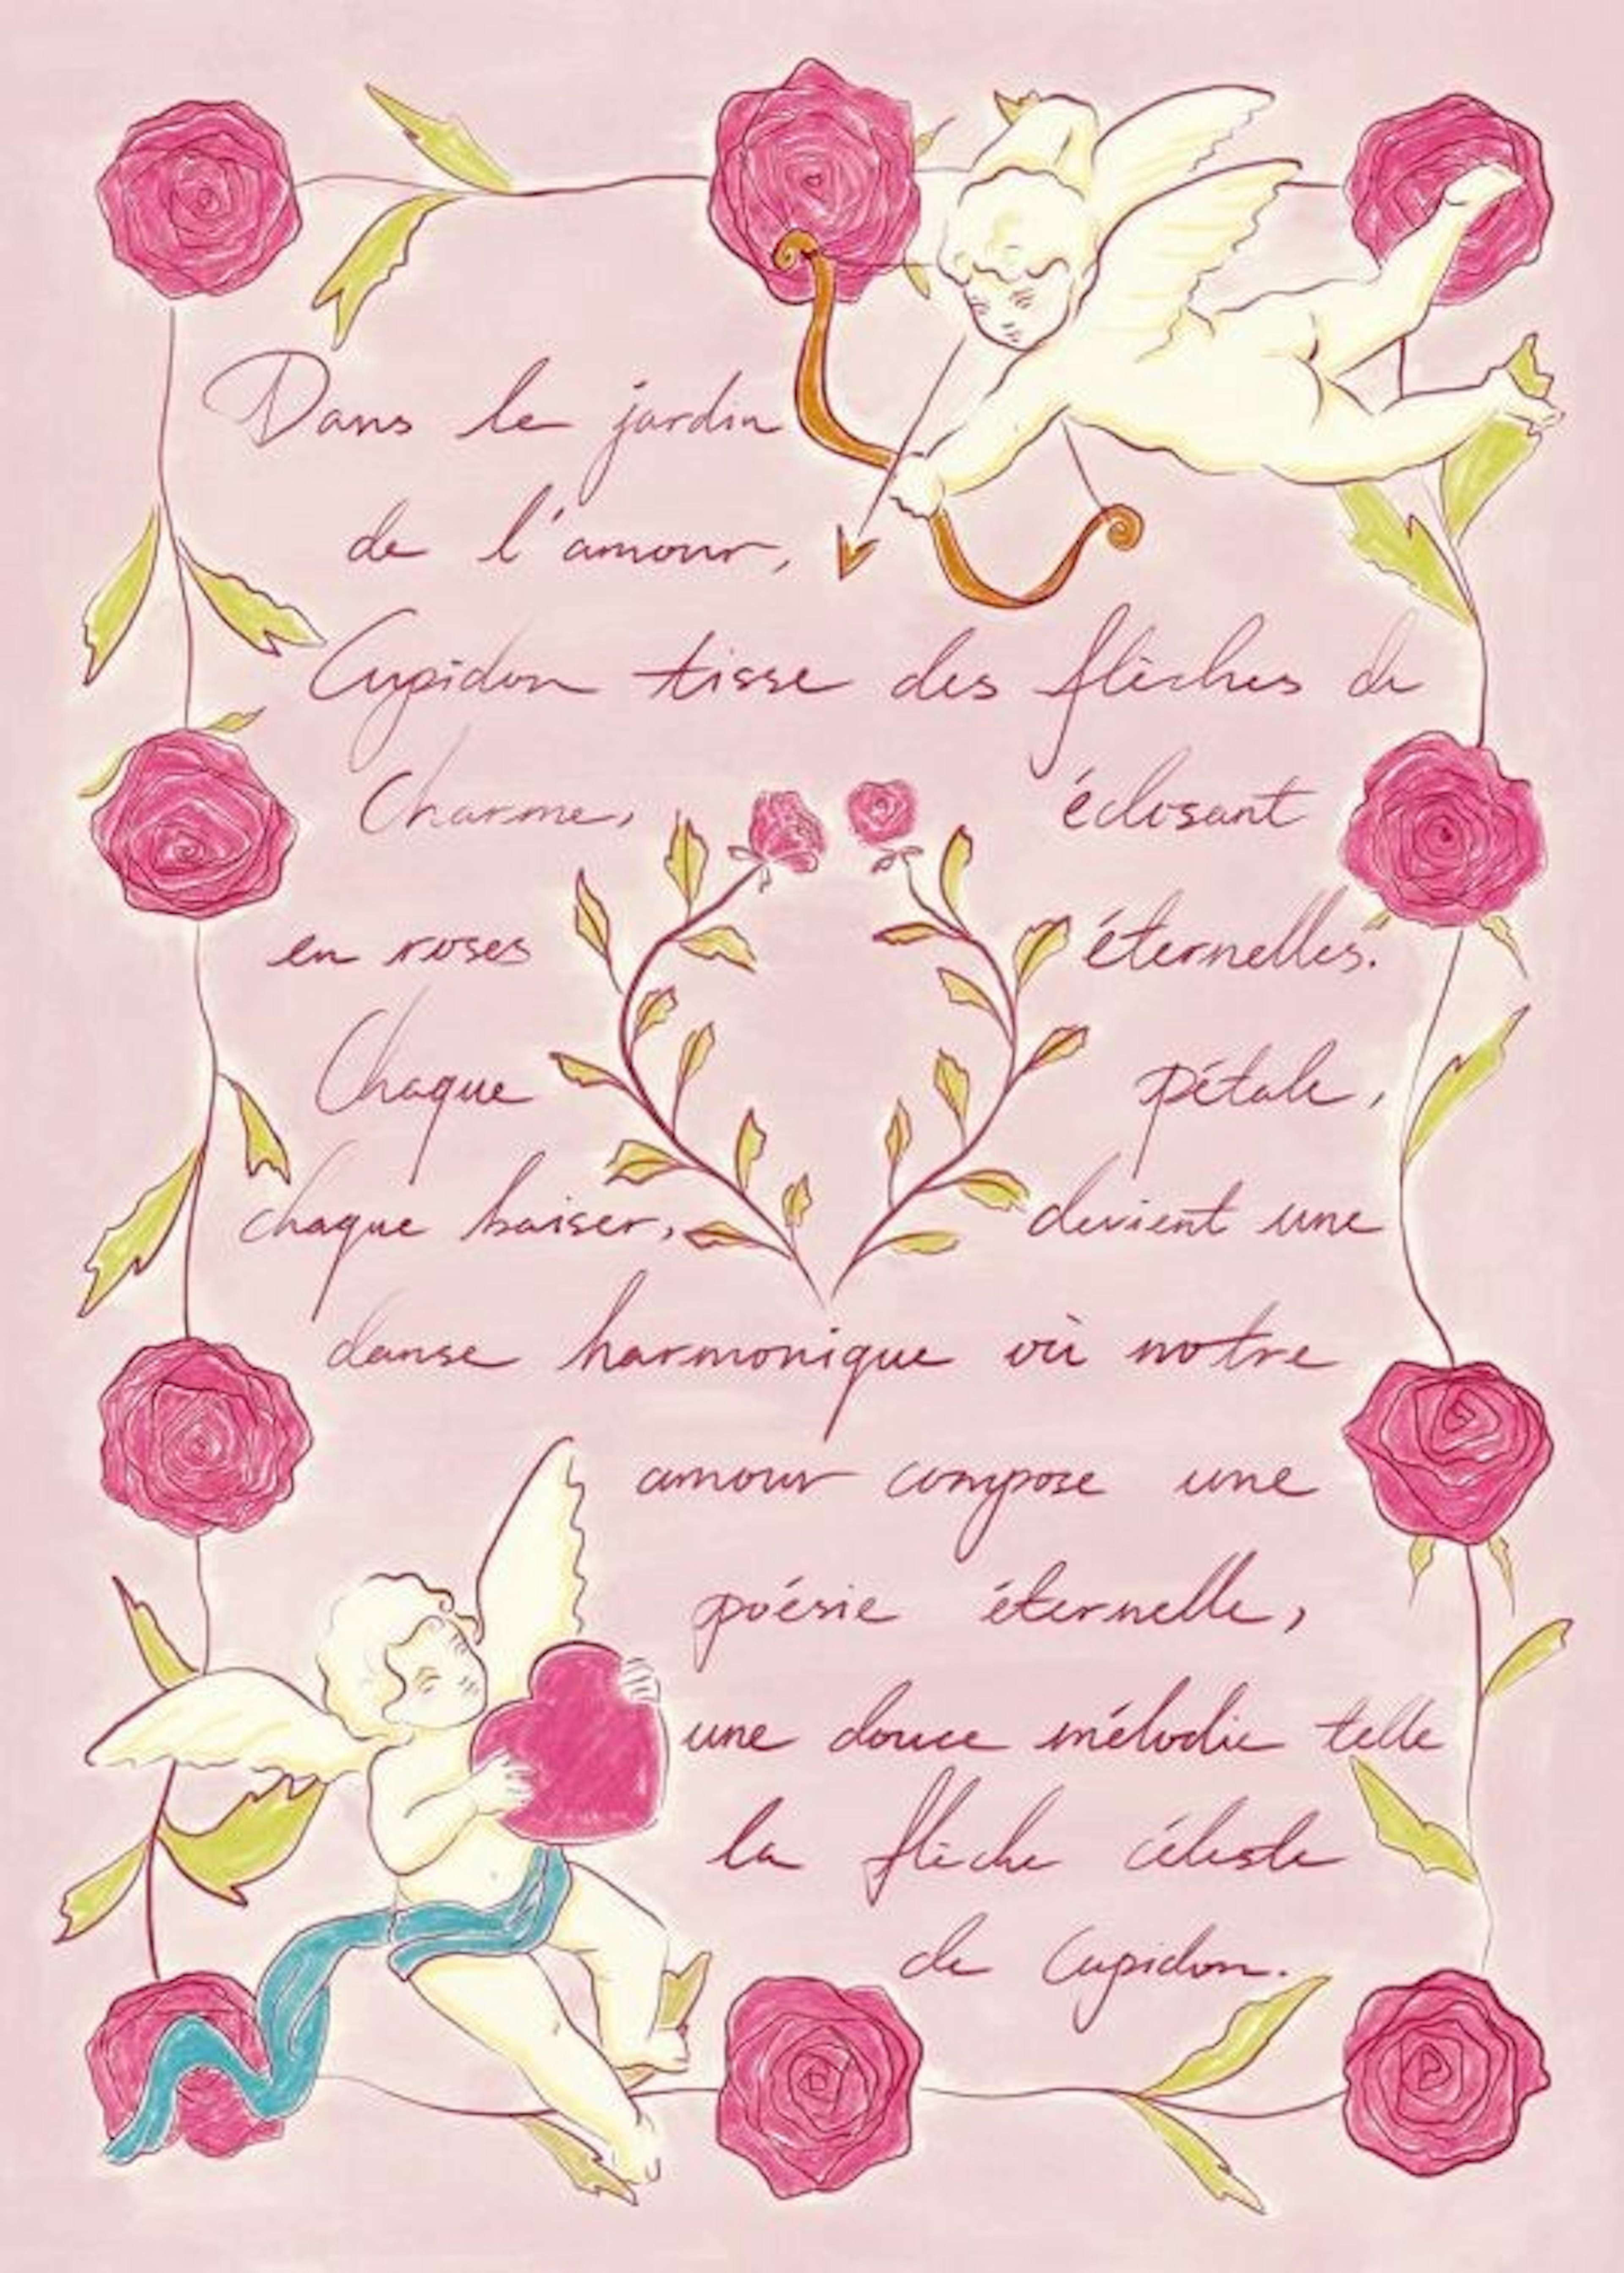 Cupid’s Love Letter Poster 0